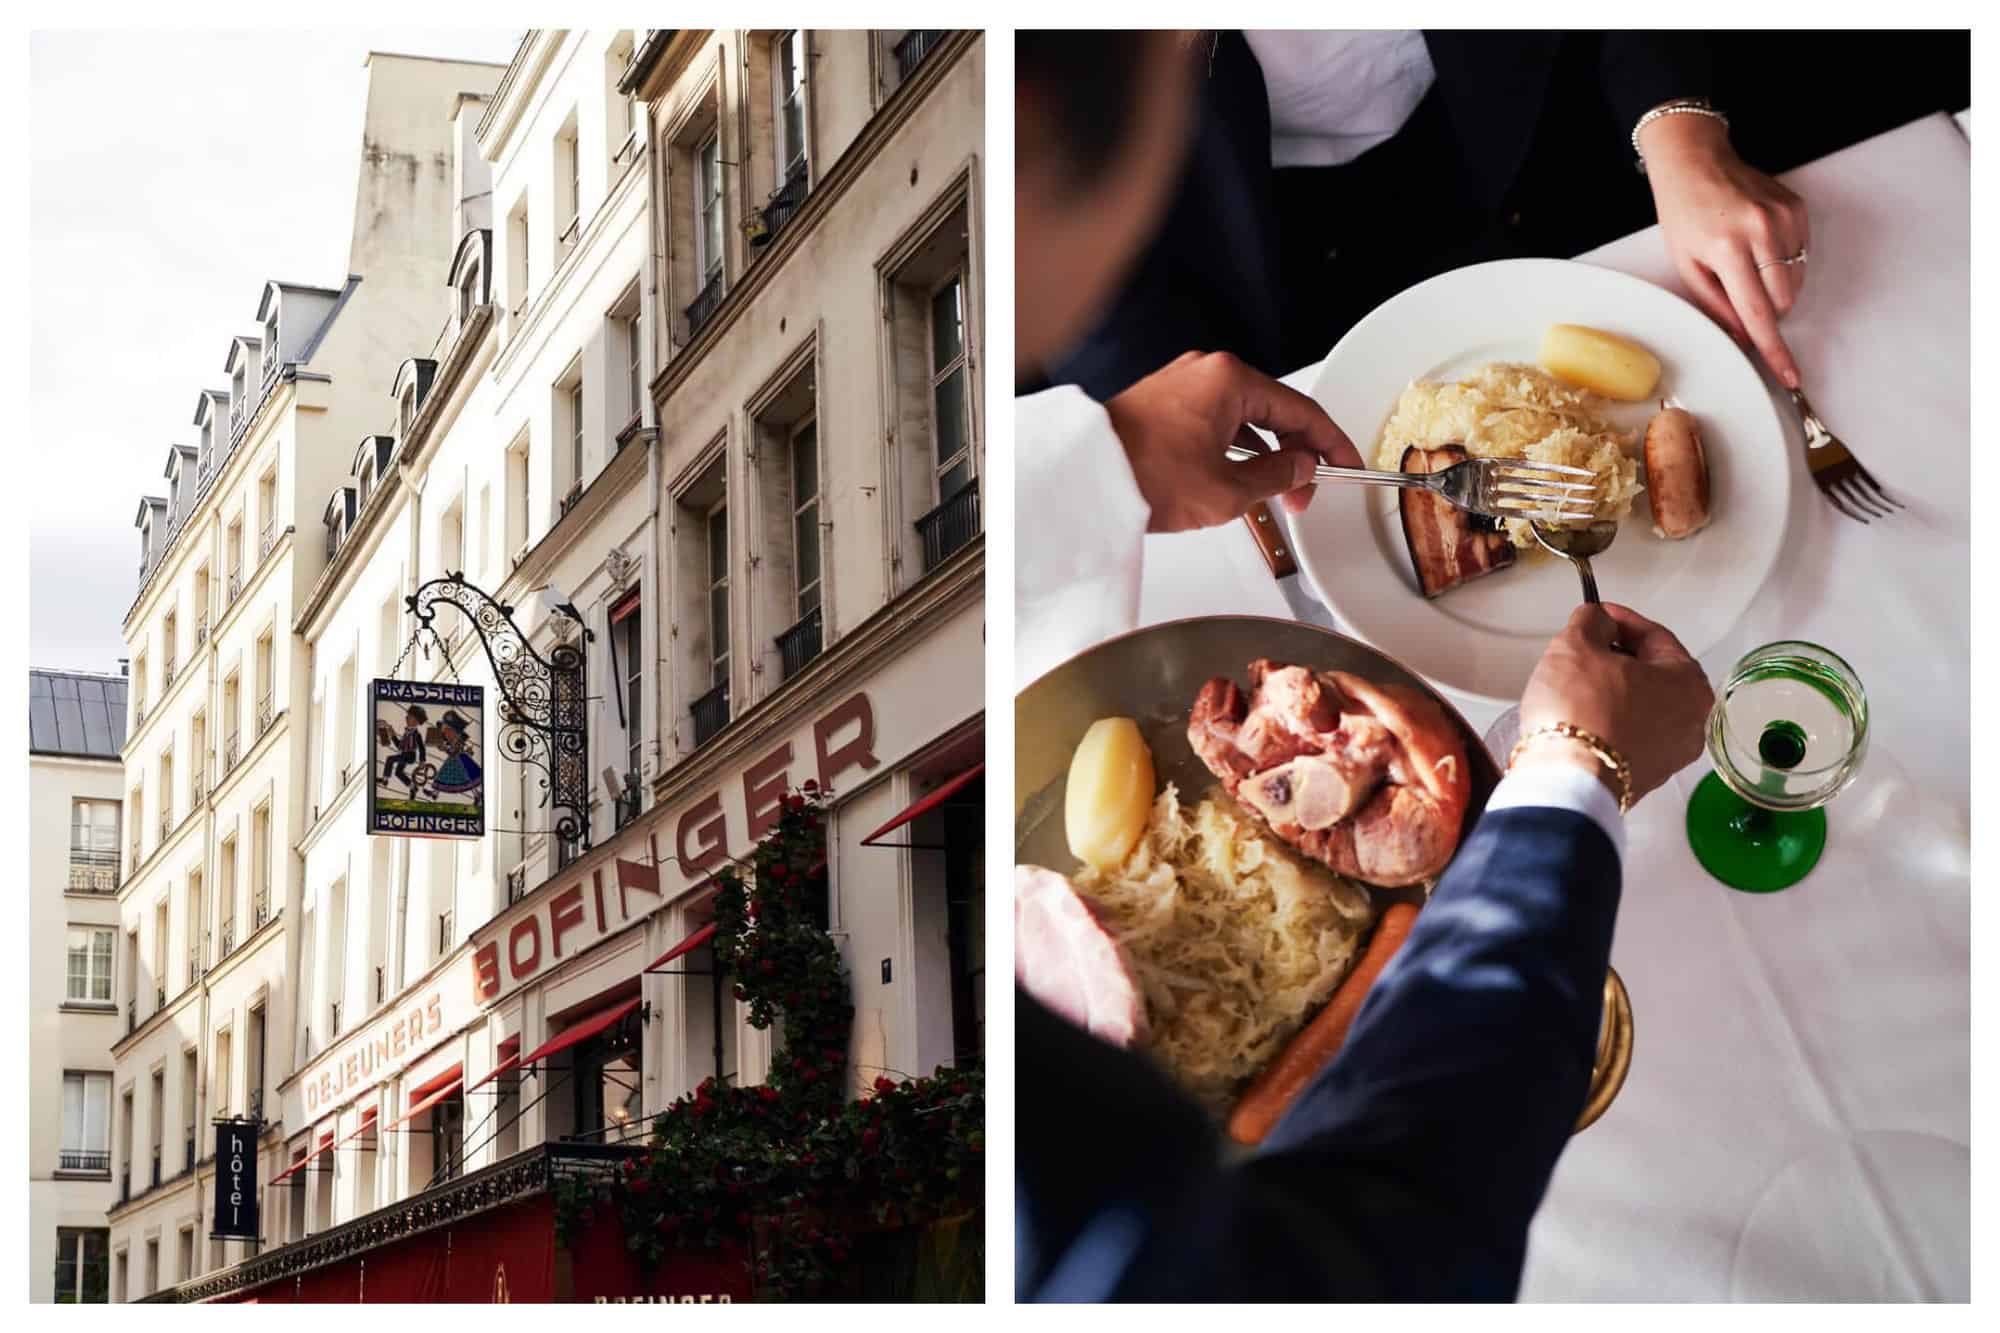 Right: the exterior of Bofinger restaurant, with red painted lettering on the facade. Right: a waiter serving choucroute onto a customer's plate at Bofinger restaurant. 